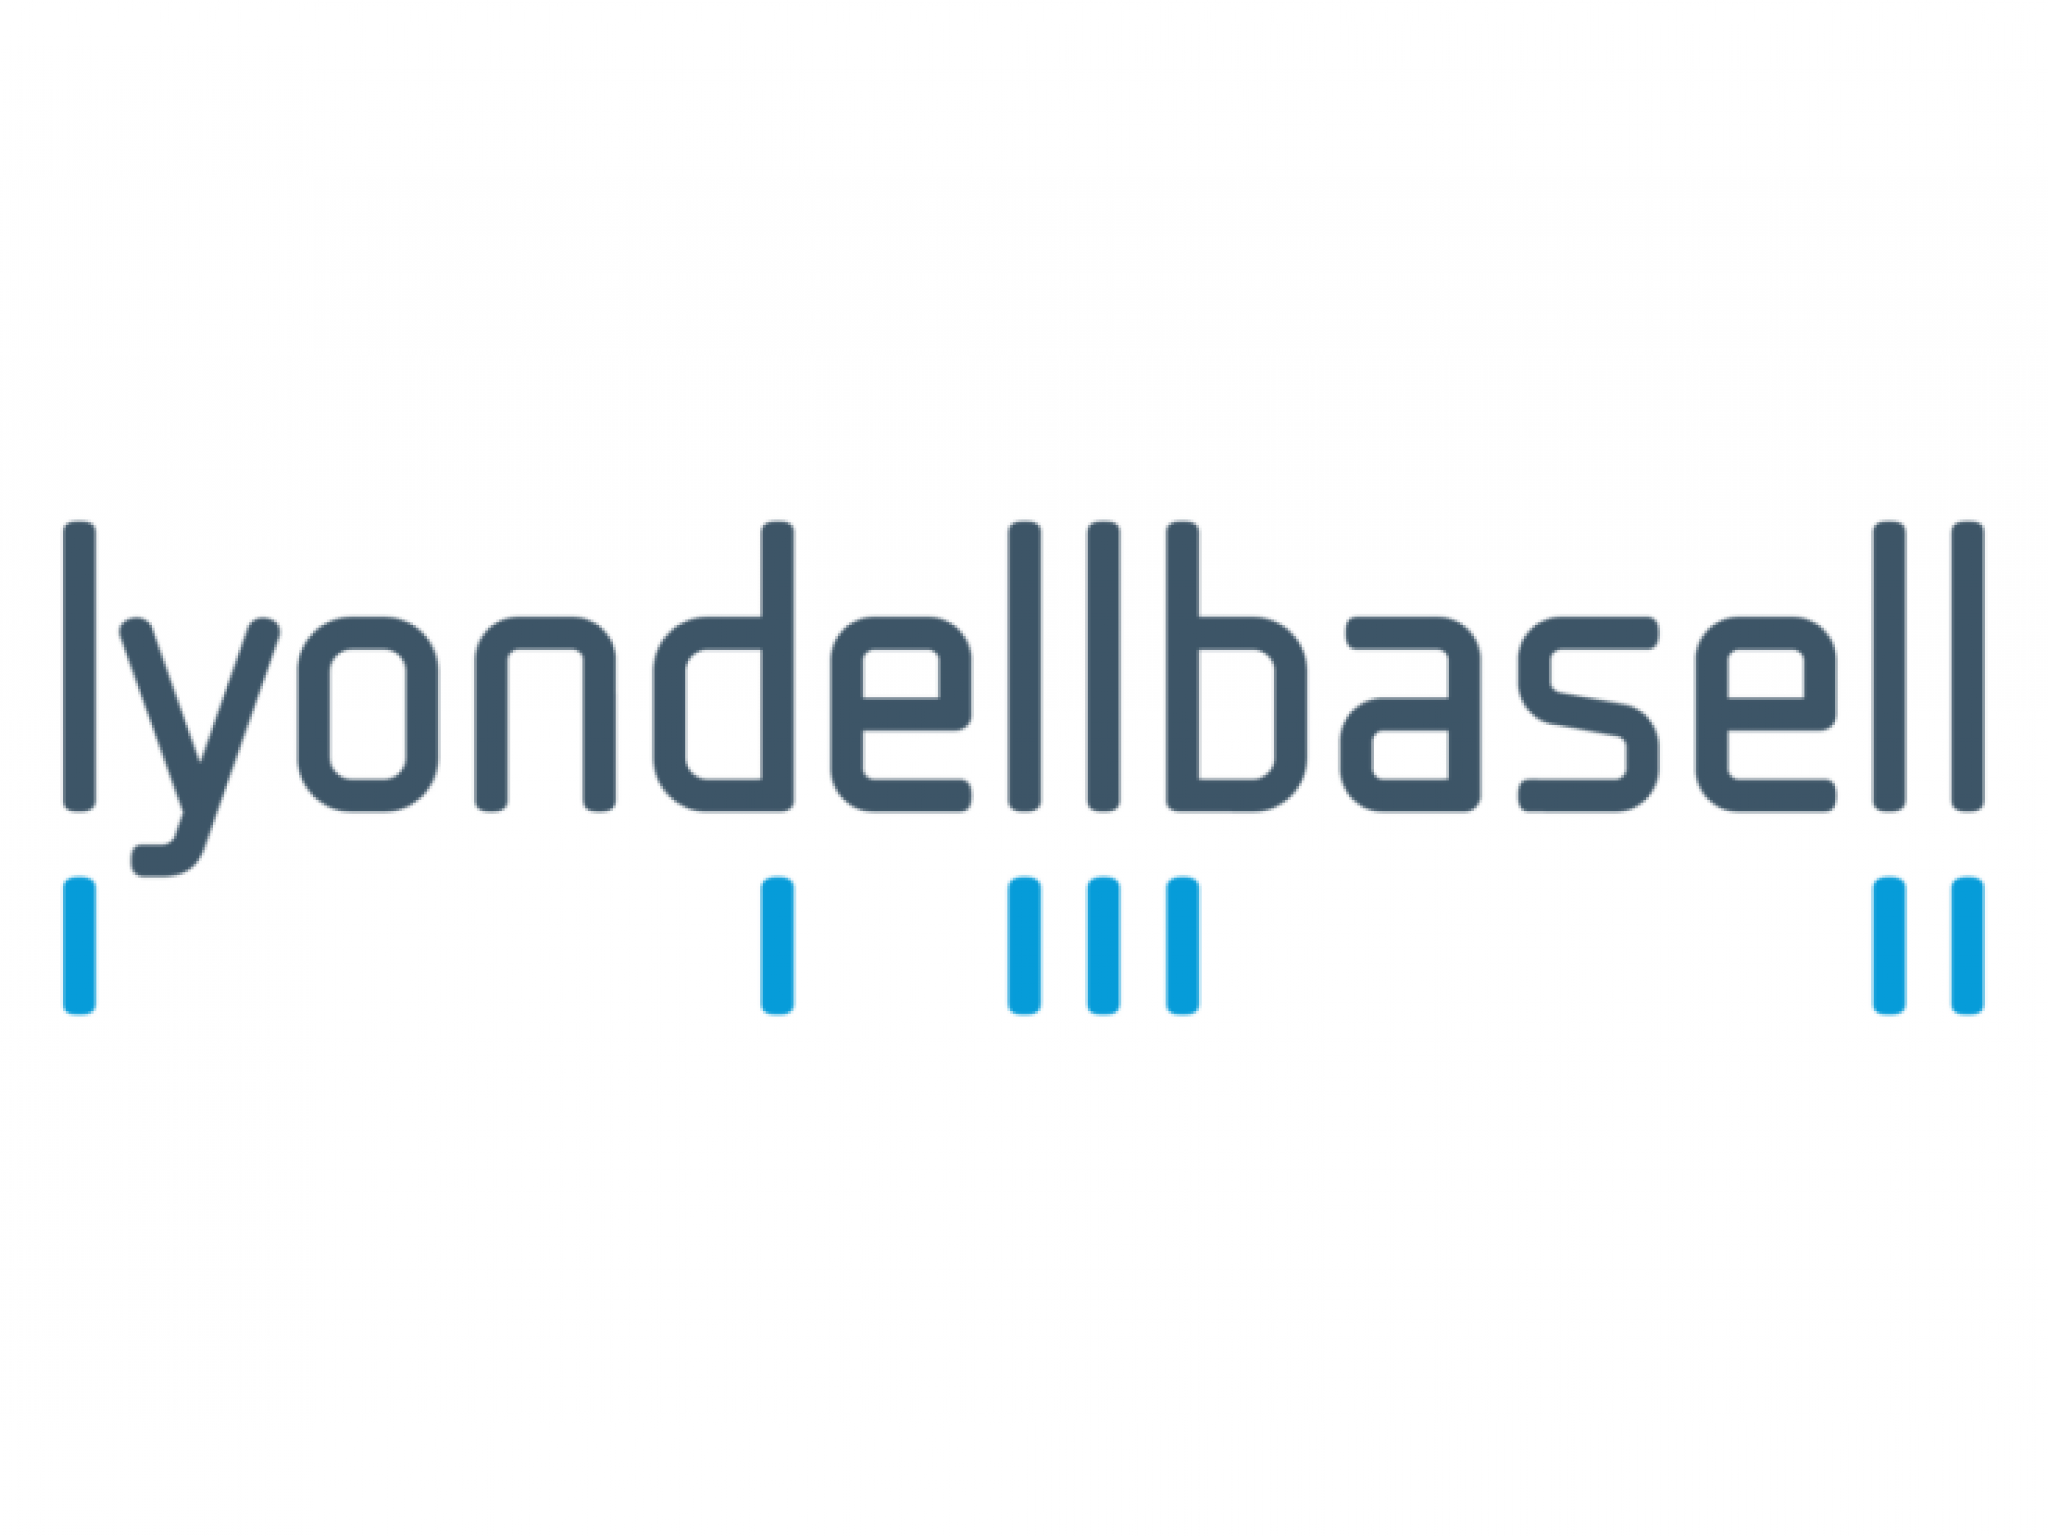  lyondellbasell-reports-mixed-q4-results-warns-on-headwinds-from-slow-demand 